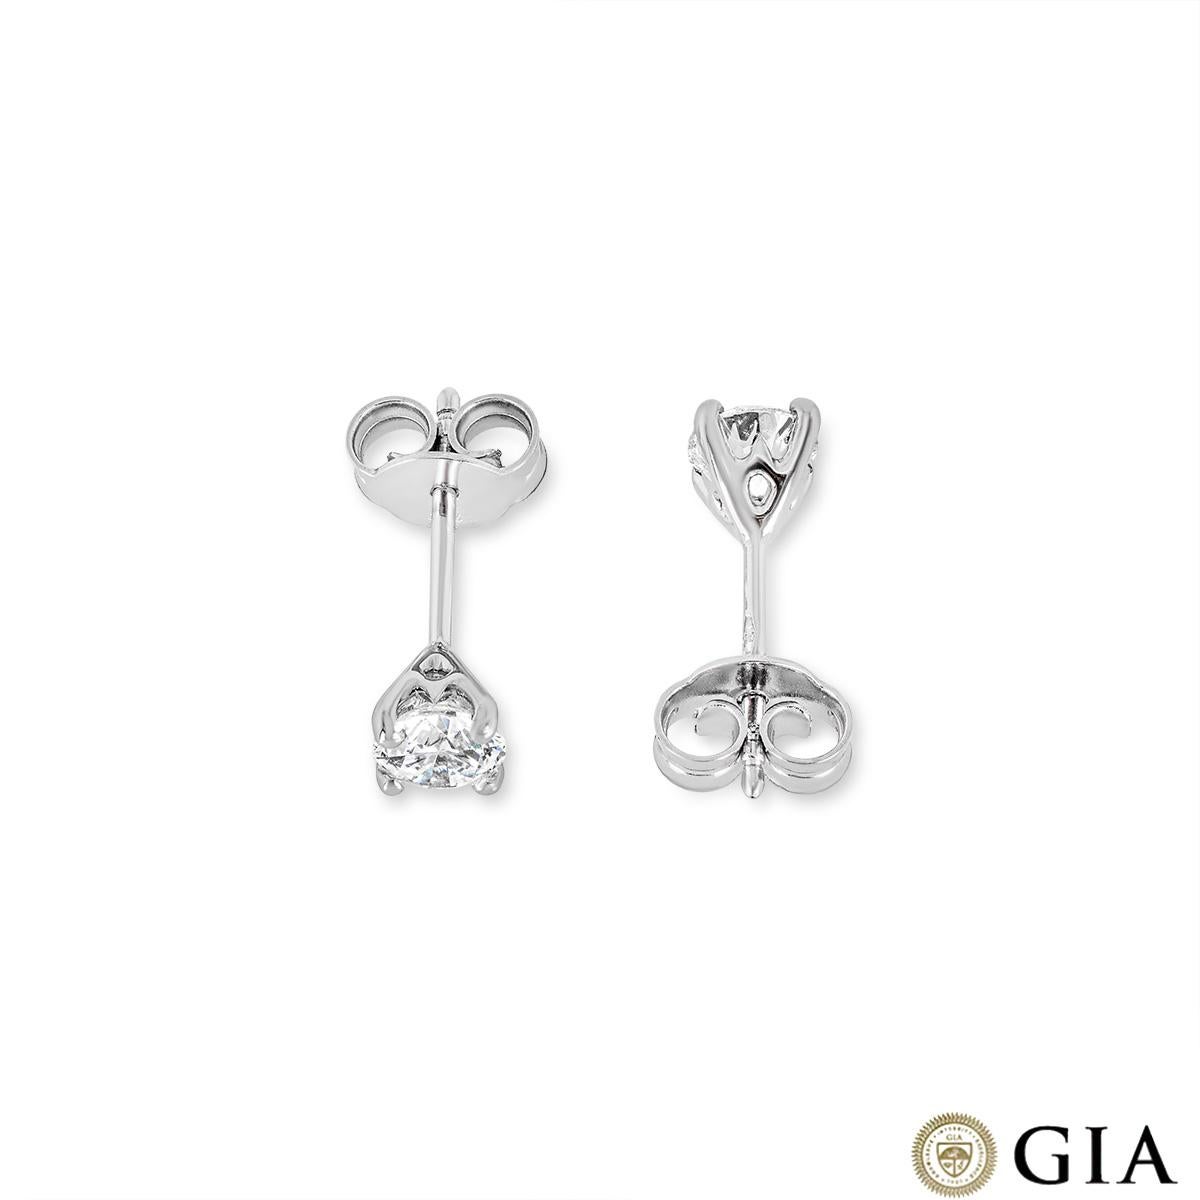 Round Cut GIA Certified White Gold Round Brilliant Cut Diamond Earrings 0.80 Carat TDW For Sale